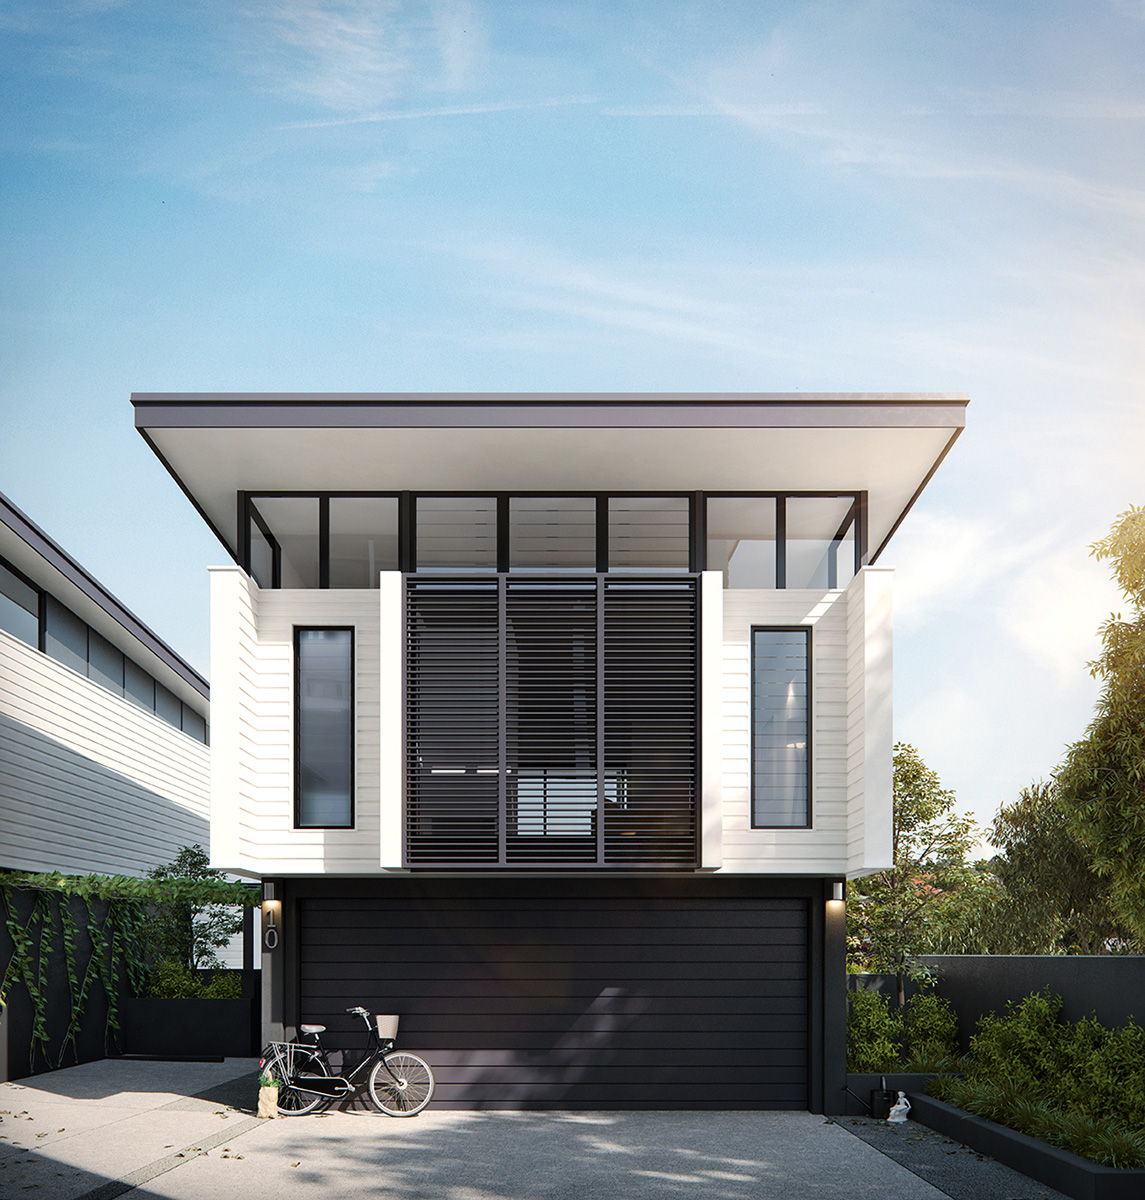 Front view of a Duplex Townhouse showcasing a sleek black ground floor and a pristine white upper floor, adorned with timber cladding and aluminum battening. Abundant natural light floods the interior through the sloped roof windows.